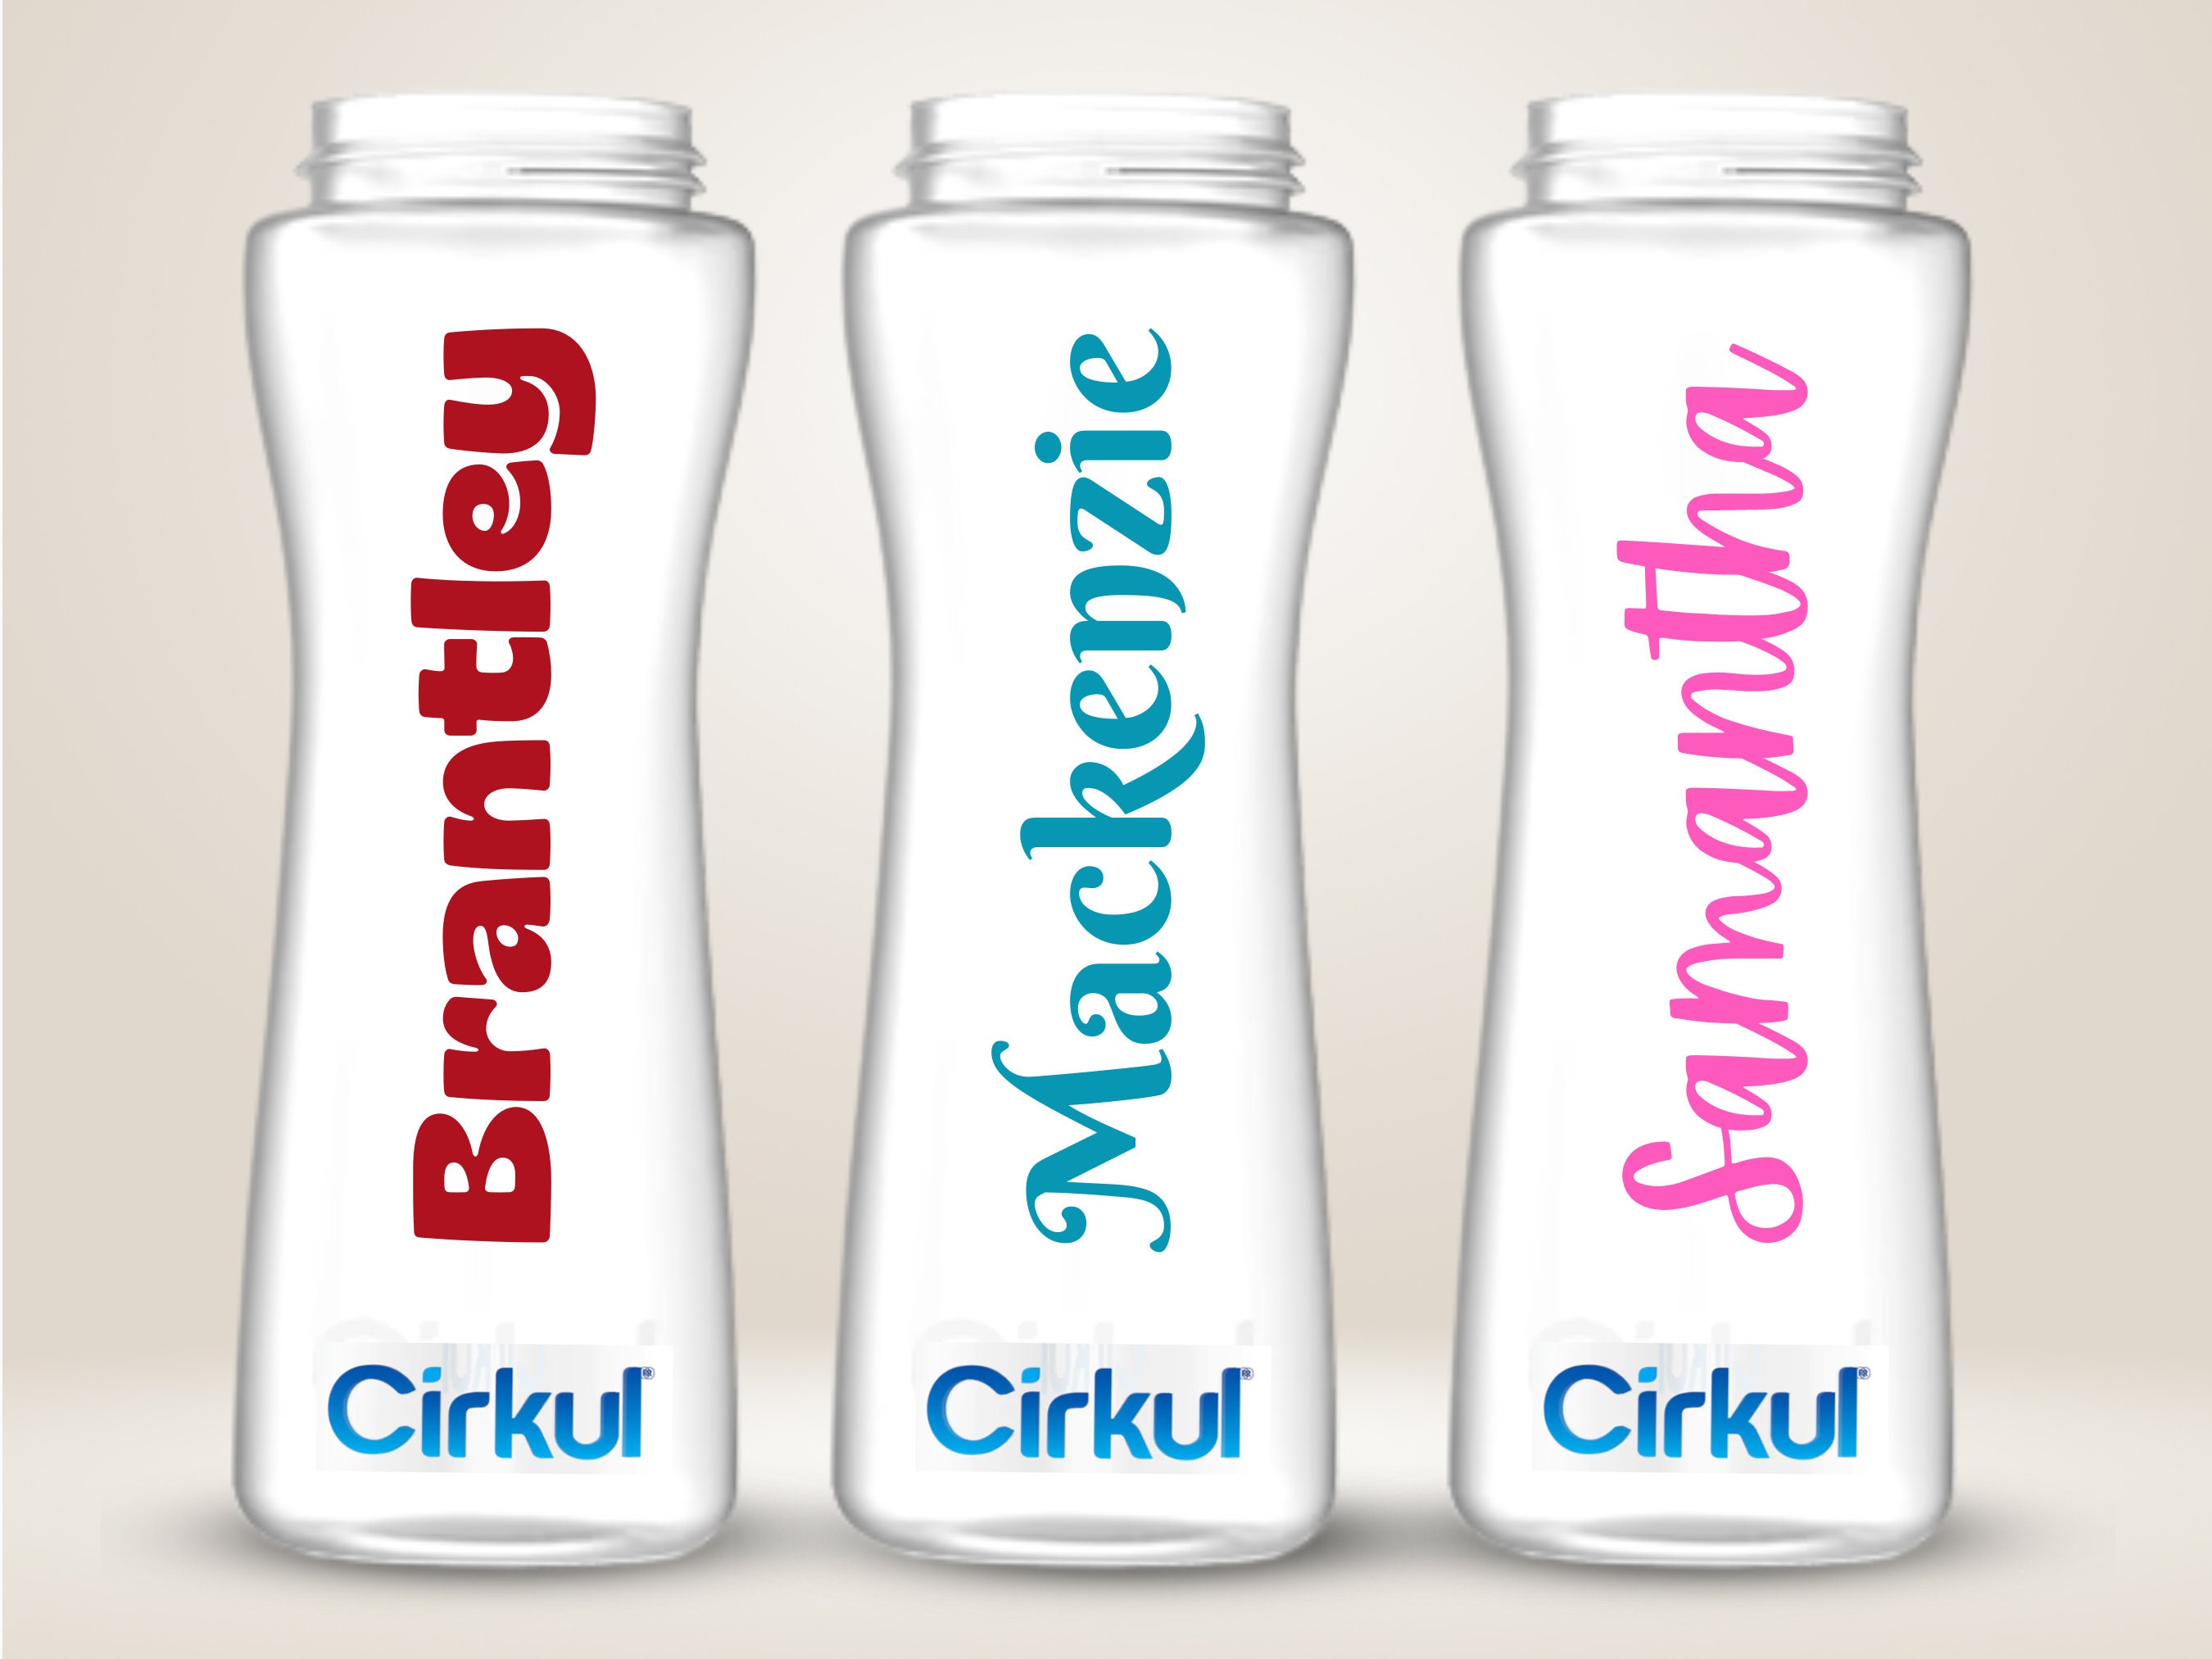 Personalized Cirkul Decal, Water Bottle Decal Name, Cup Decal, Sports Drink  Decal, Cirkul Water Bottle Decal, Decal Stickers, Vinyl Decals 